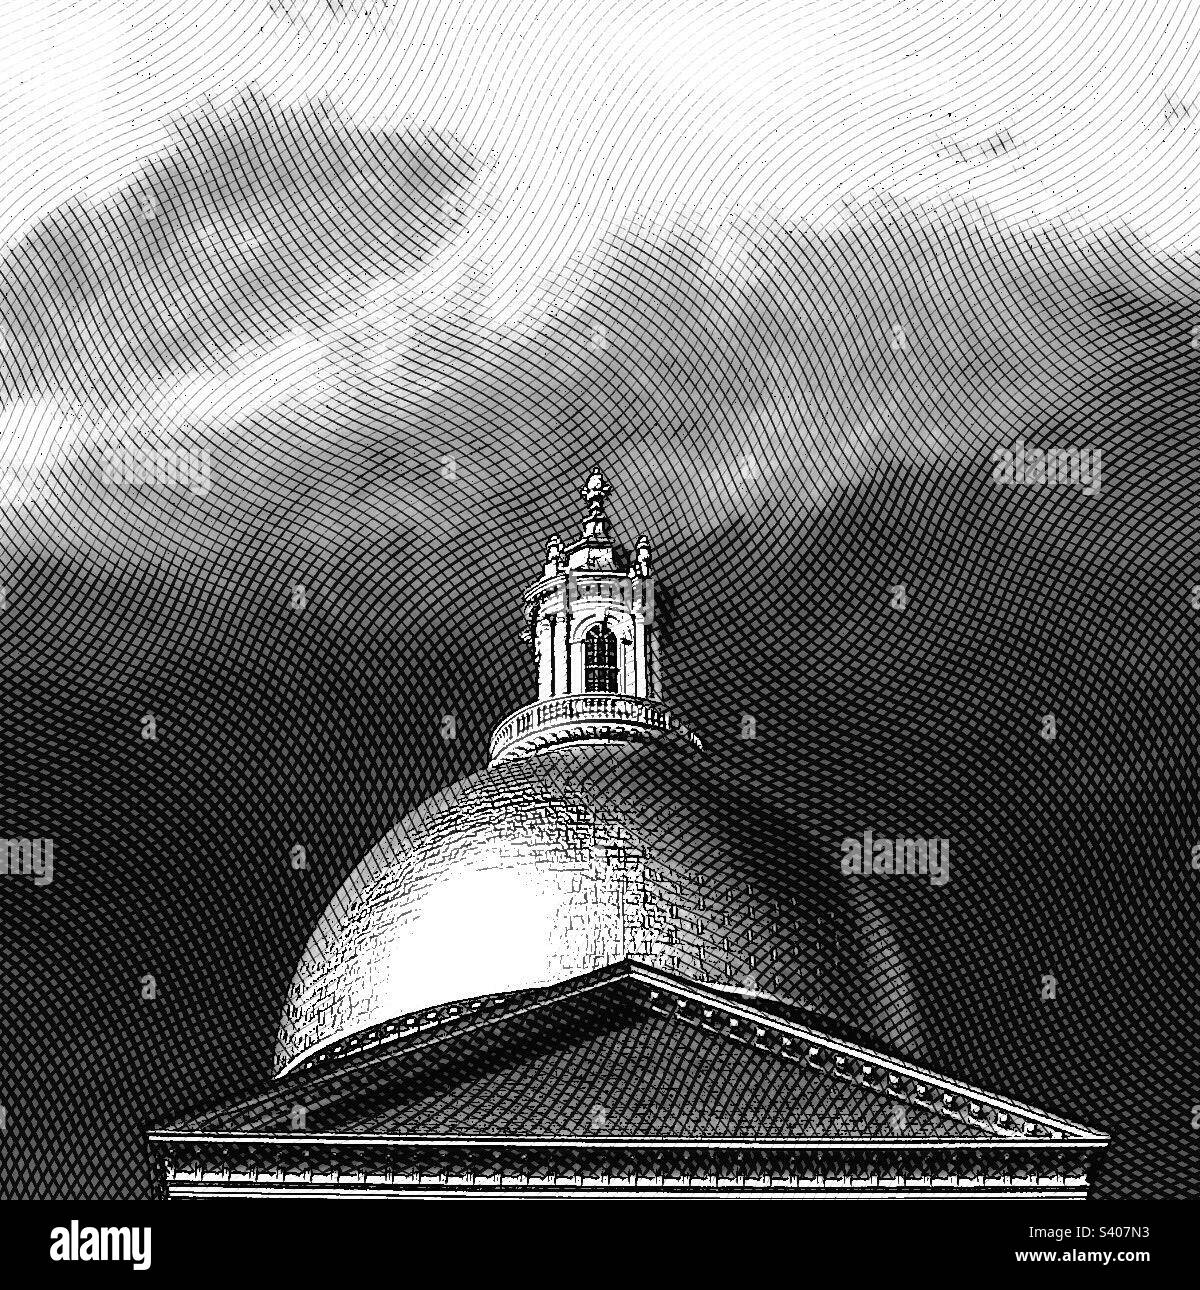 Boston, Massachusetts, USA - dome of MA State House with black and white and etching filters. Clouds in the sky as background. This is the capitol building and the seat of state government. Stock Photo